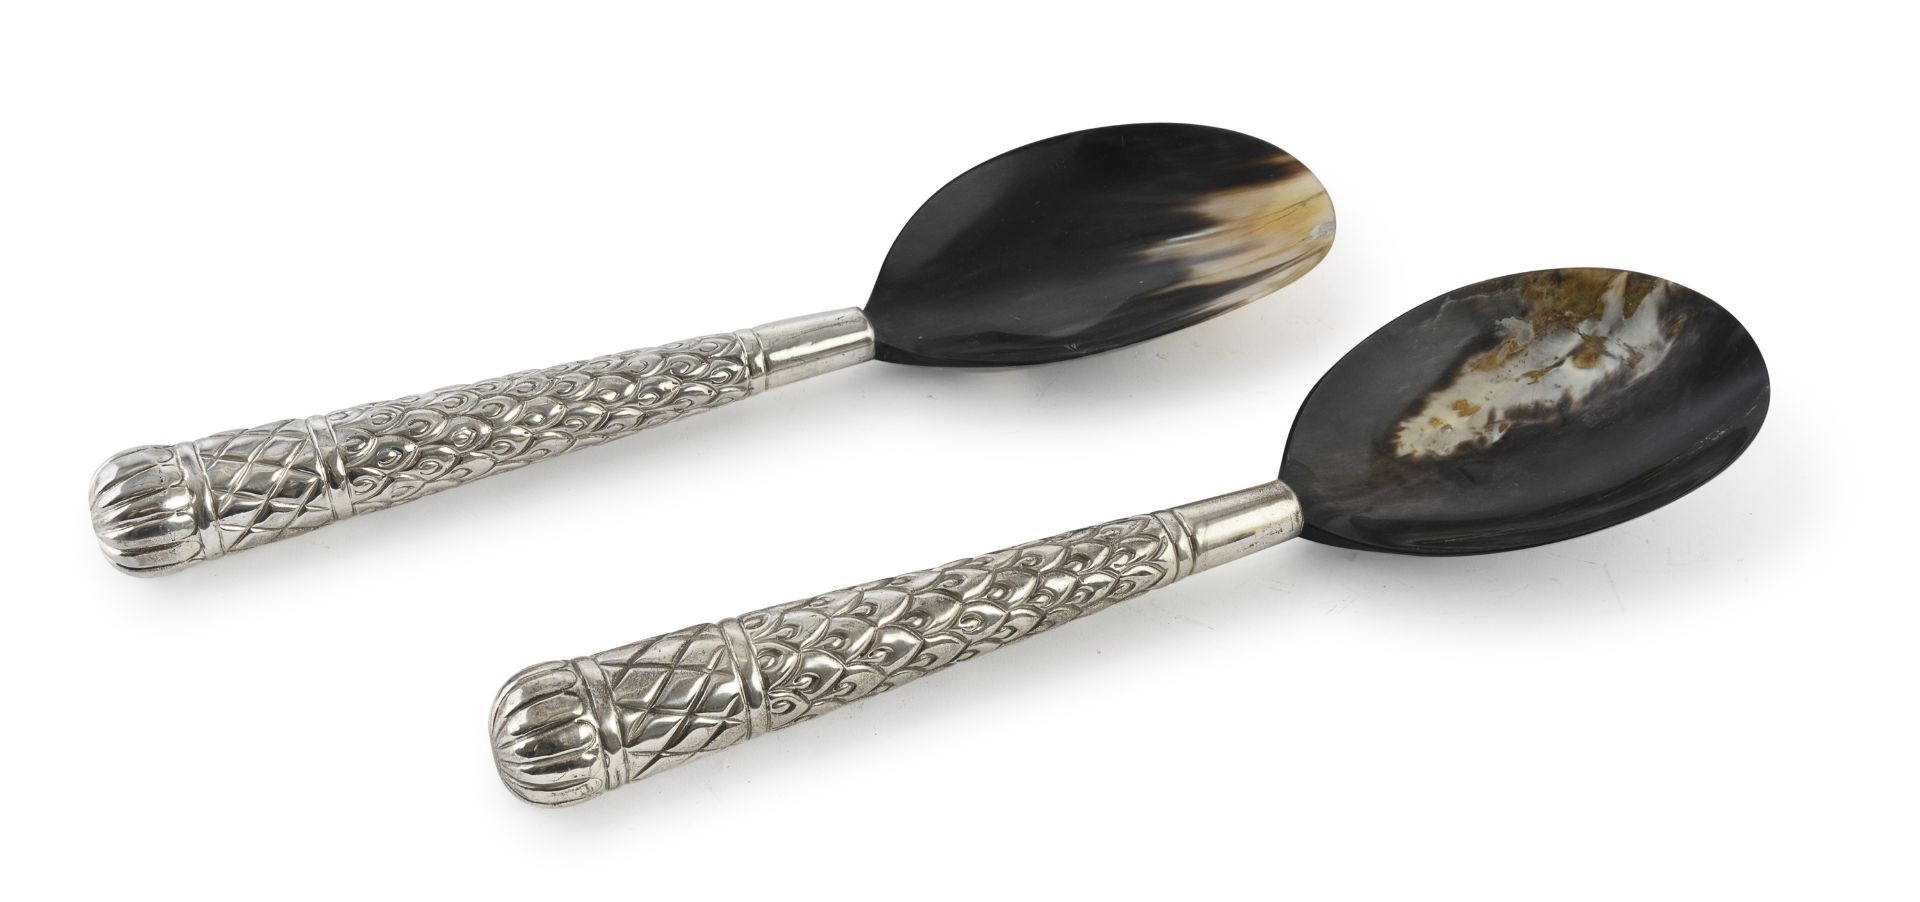 PAIR OF SILVER-PLATED ROASTING SPOONS 20TH CENTURY